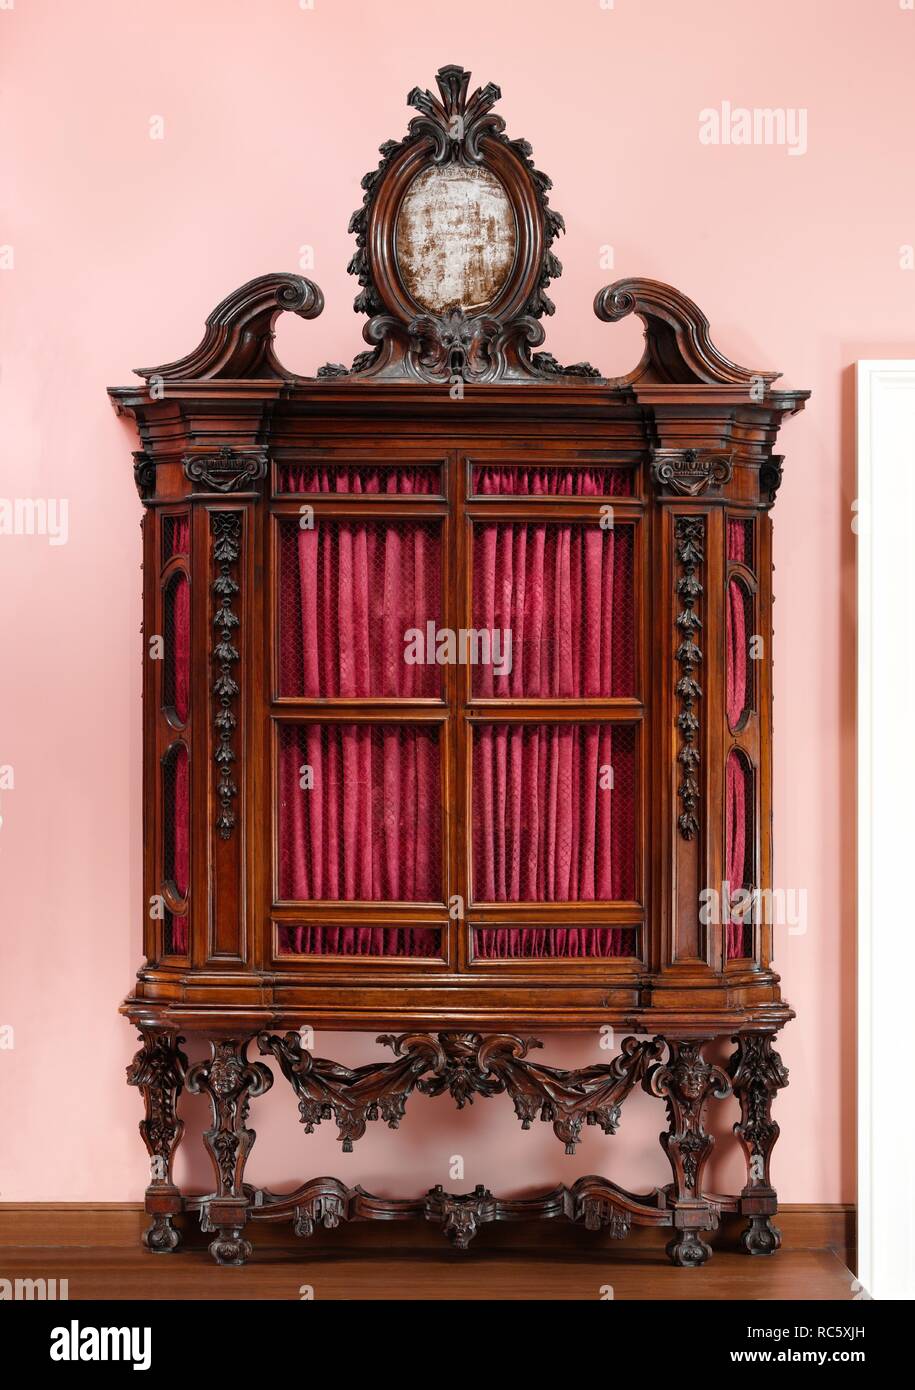 Bookcase (one of a pair). Culture: Italian, Rome. Designer: Design attributed to the architect Niccolo Michetti (Italian, died 1759). Dimensions: Overall: 159 x 24 x 94 in. (403.9 x 61 x 238.8 cm). Date: ca. 1715.  During the seventeenth and eighteenth centuries Rome was the capital of the Papal States. All the important administrative departments of the Roman Catholic Church were located within its walls. Of these, the Sacred College of Cardinals was the most significant. Only its members could vote in conclave for the next Vicar of Christ, a new pope. To become a part of this powerful body w Stock Photo